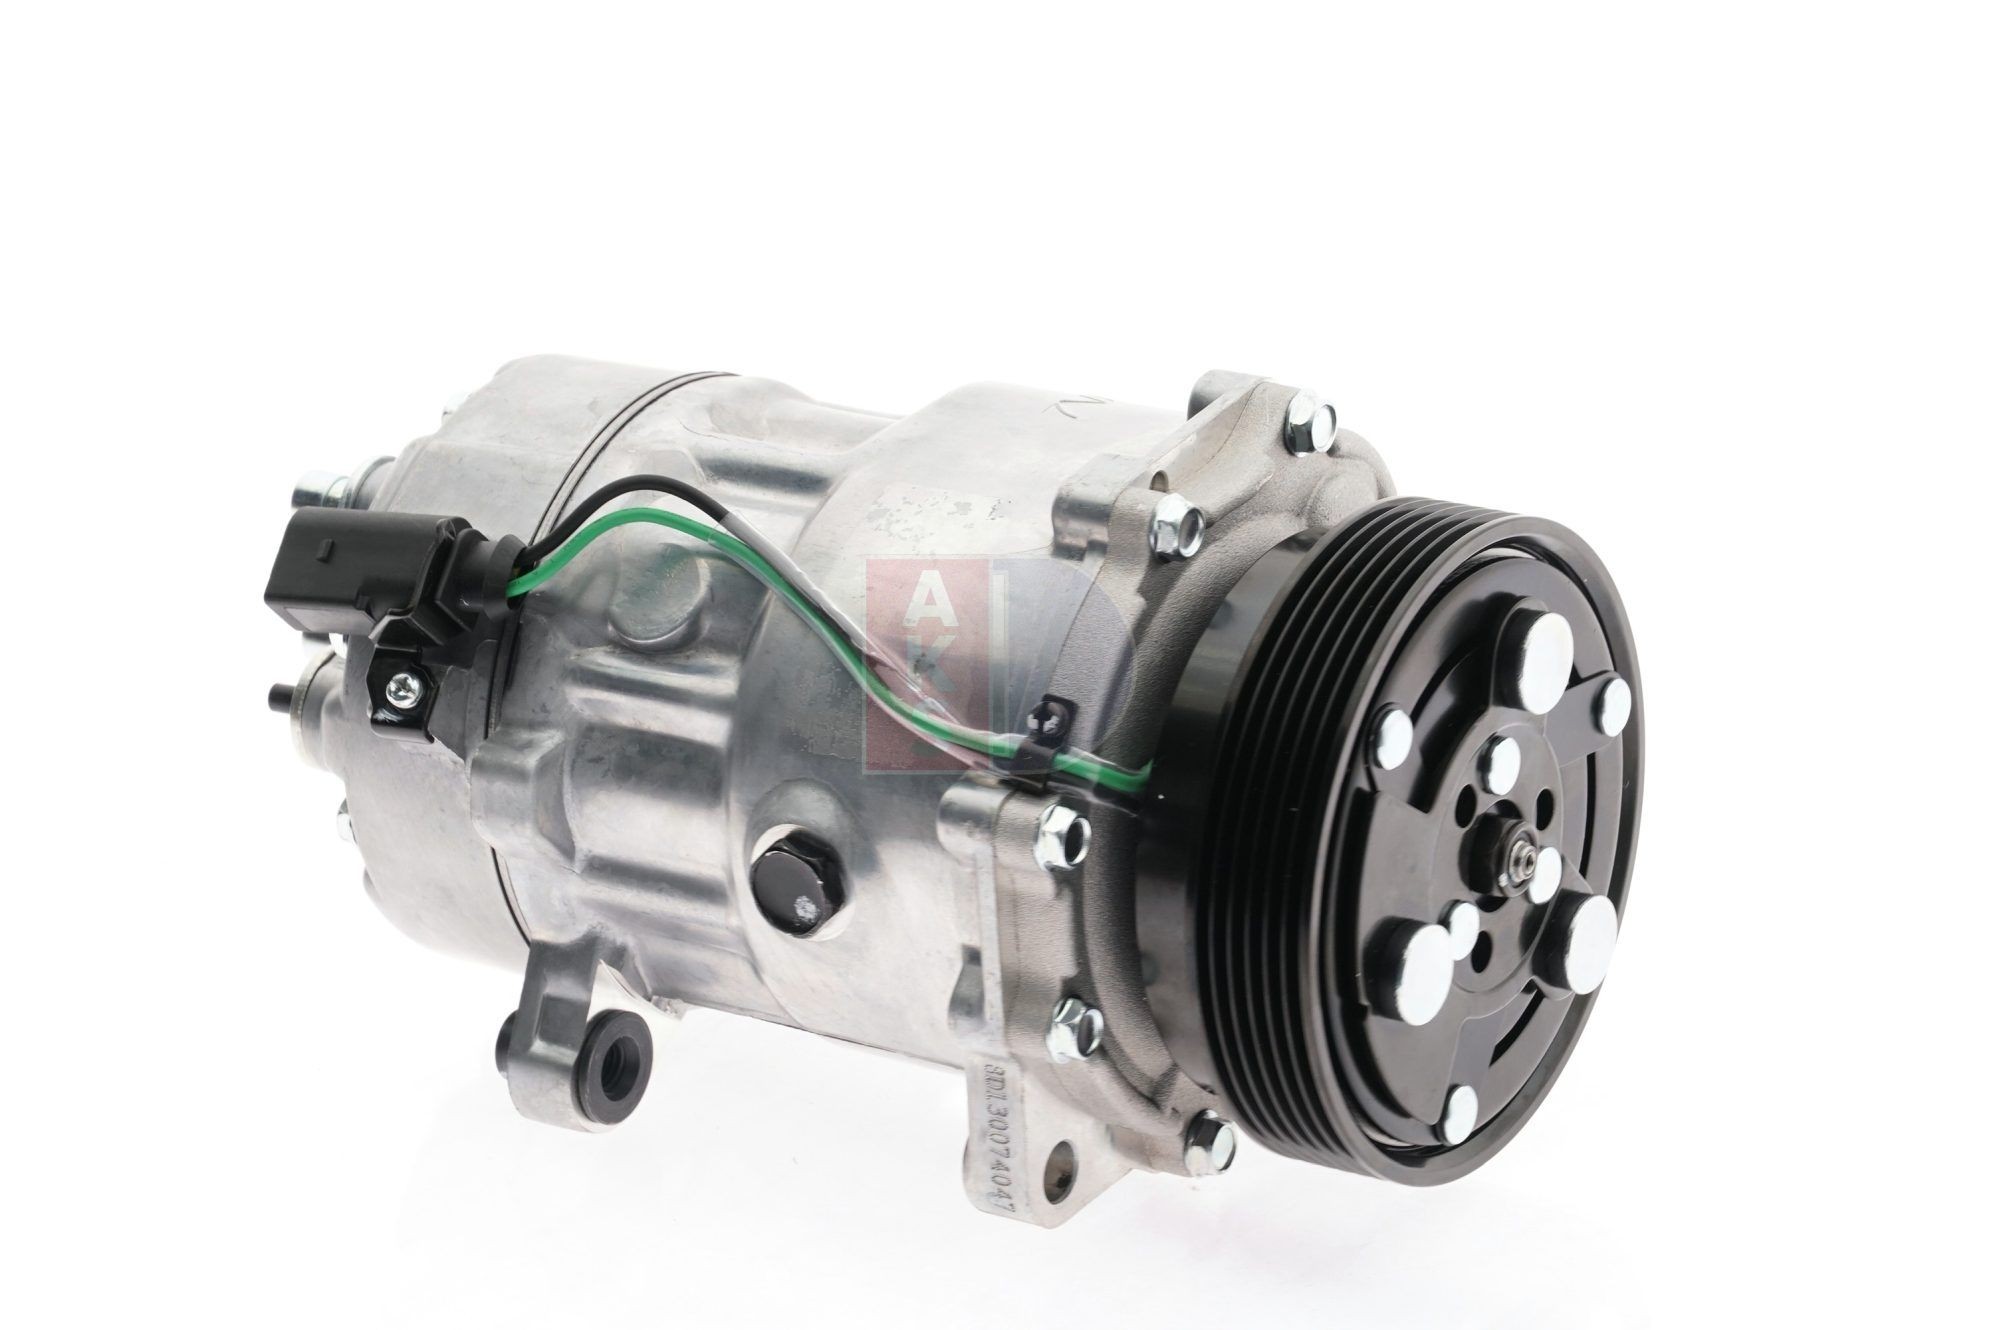 AKS DASIS 851770N Air conditioner compressor SD7V16, 12V, PAG 46, R 134a, with magnetic clutch